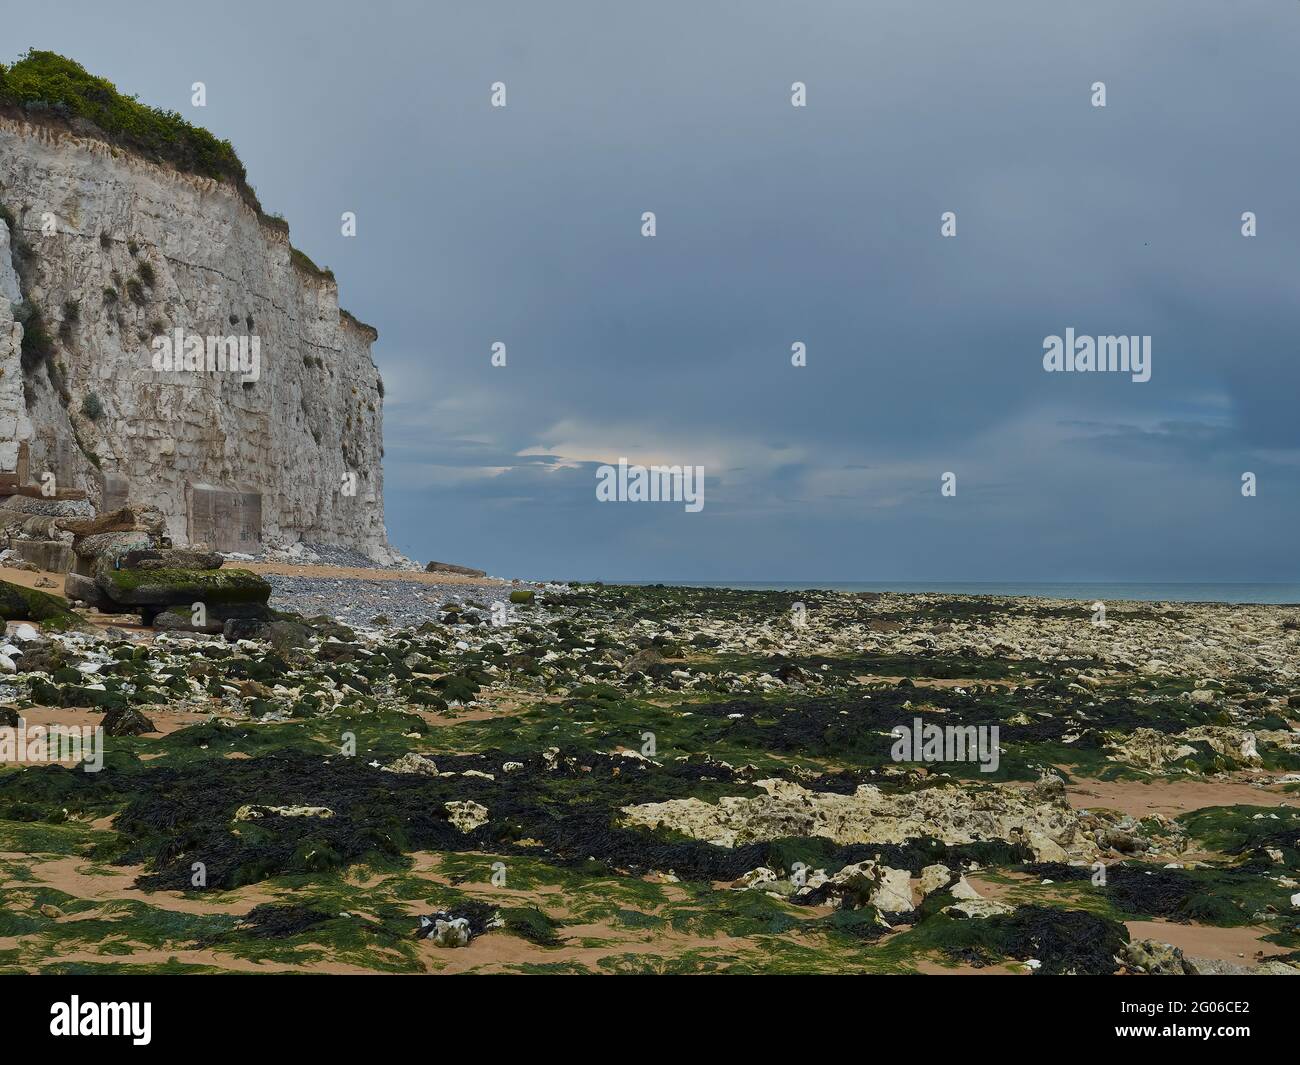 A deserted stretch of beach at Stone Bay, strewn with rockfall from the nearby chalk cliff. A hint of sun breaks through a torn cloud in a heavy sky. Stock Photo